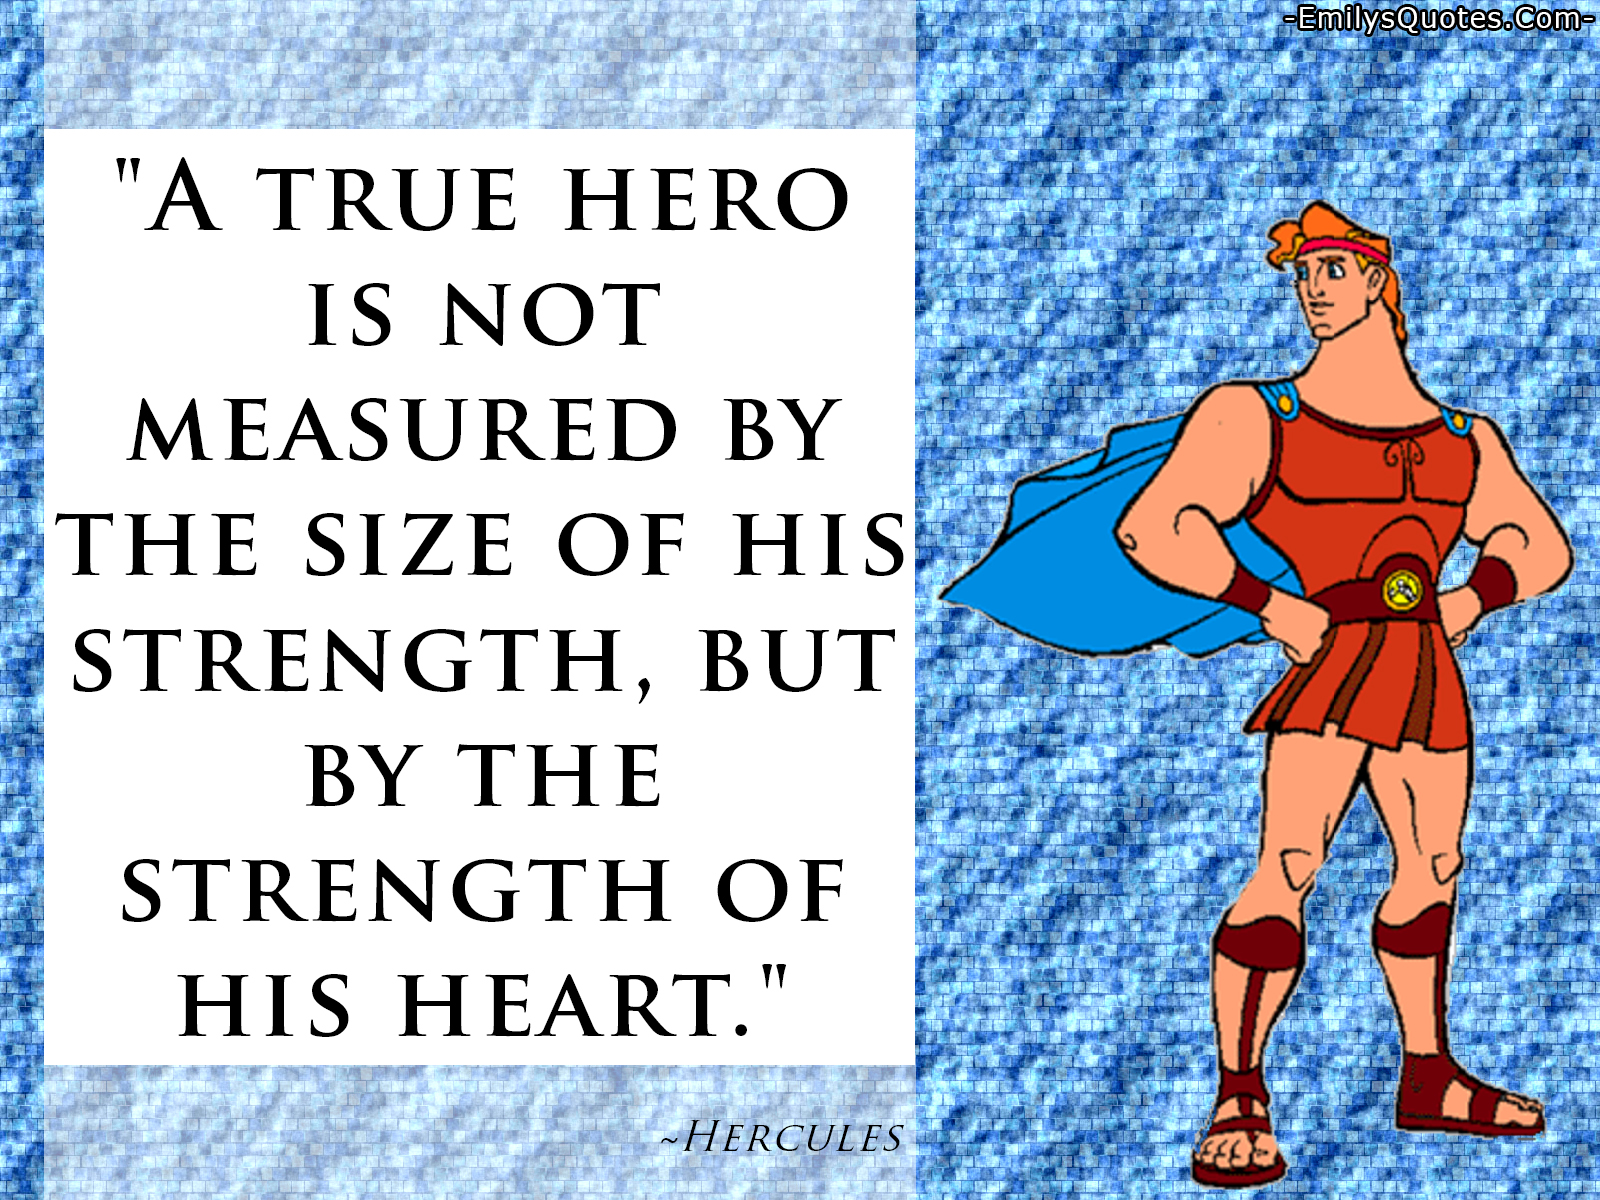 A true hero is not measured by the size of his strength, but by the strength of his heart